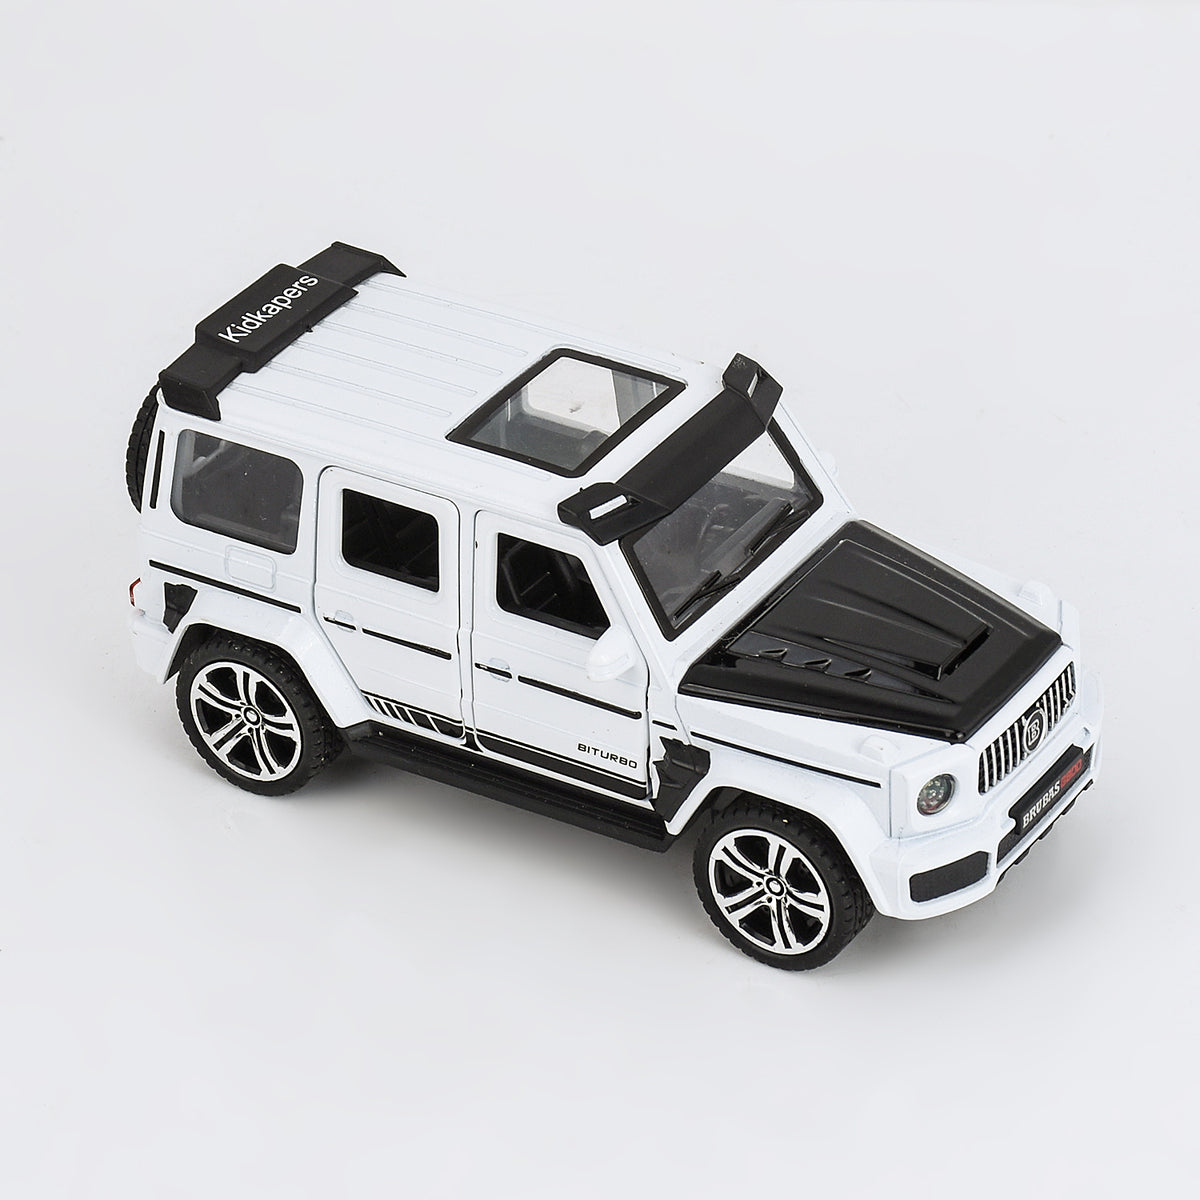 Kidkapers Toy Car for Children, Alloy Collectible Toy Vehicle Car Model with Lights and Sound